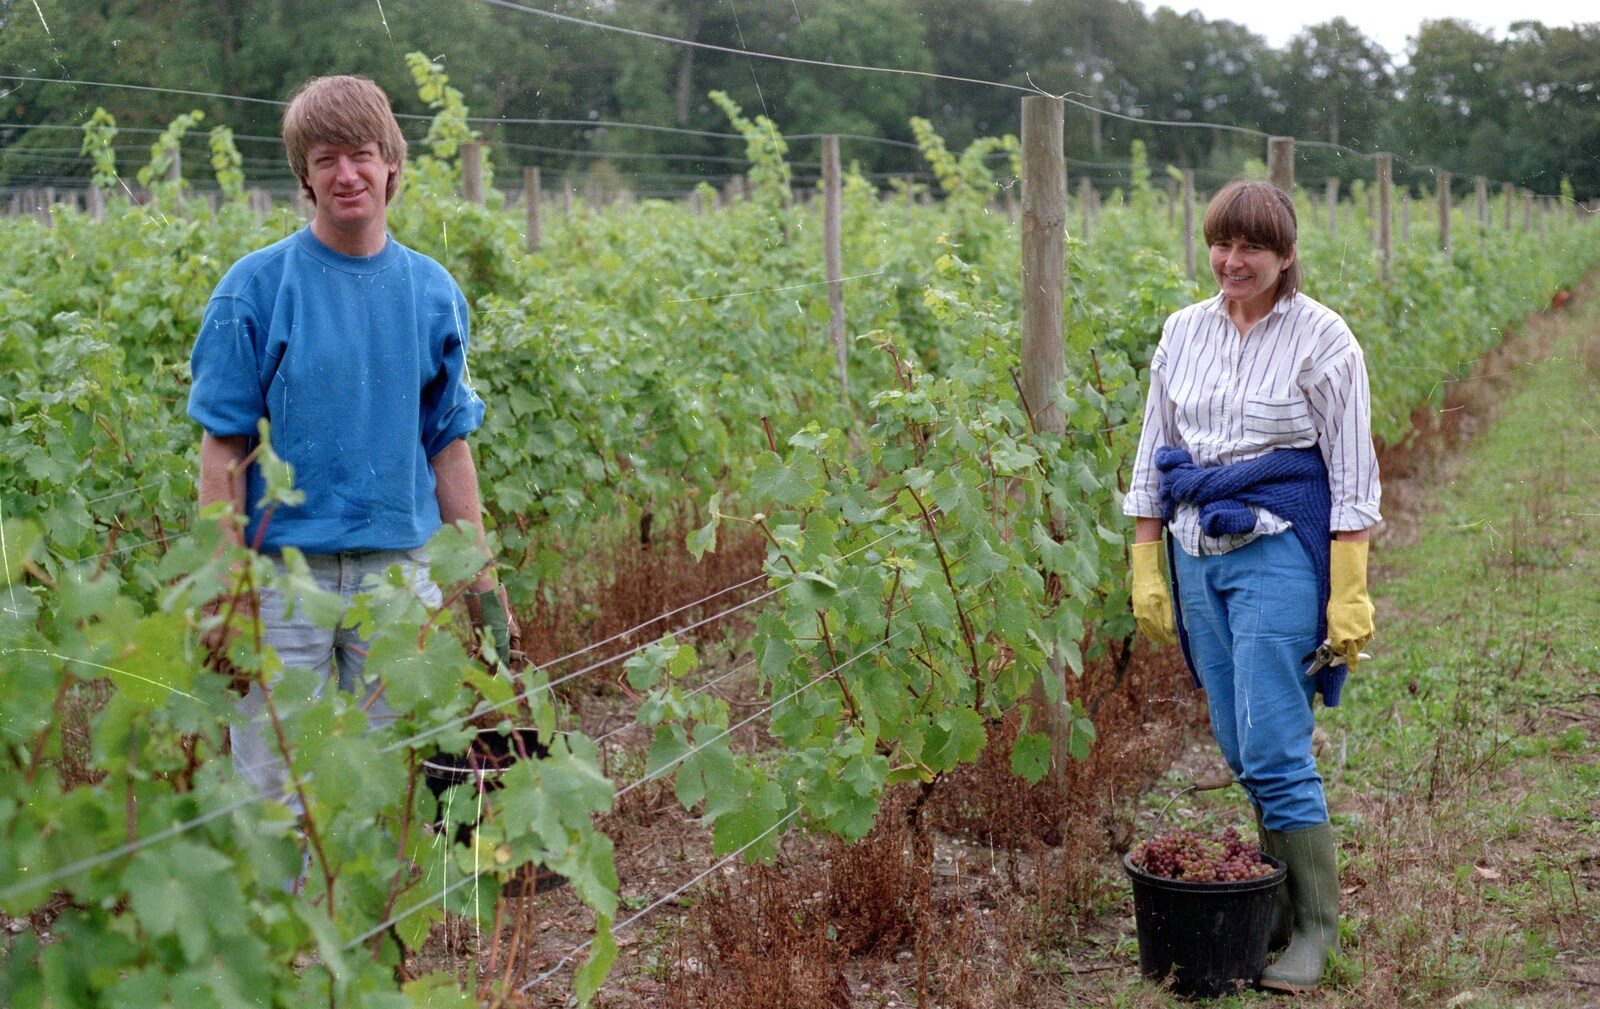 Neil and Caroline pick grapes from Harrow Vineyard Harvest and Wootton Winery, Dorset and Somerset - 5th September 1989